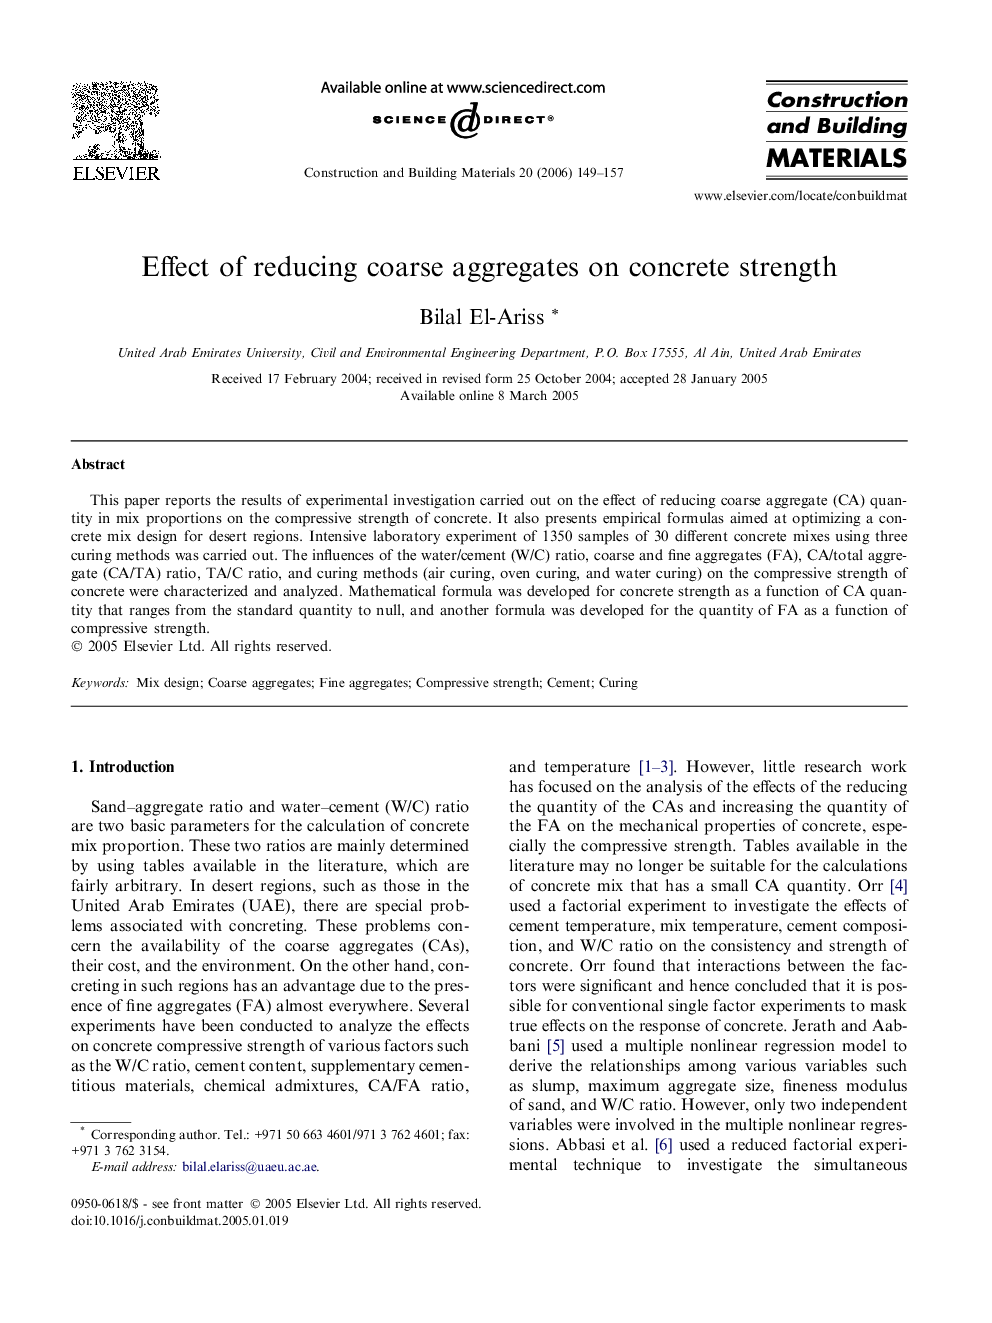 Effect of reducing coarse aggregates on concrete strength